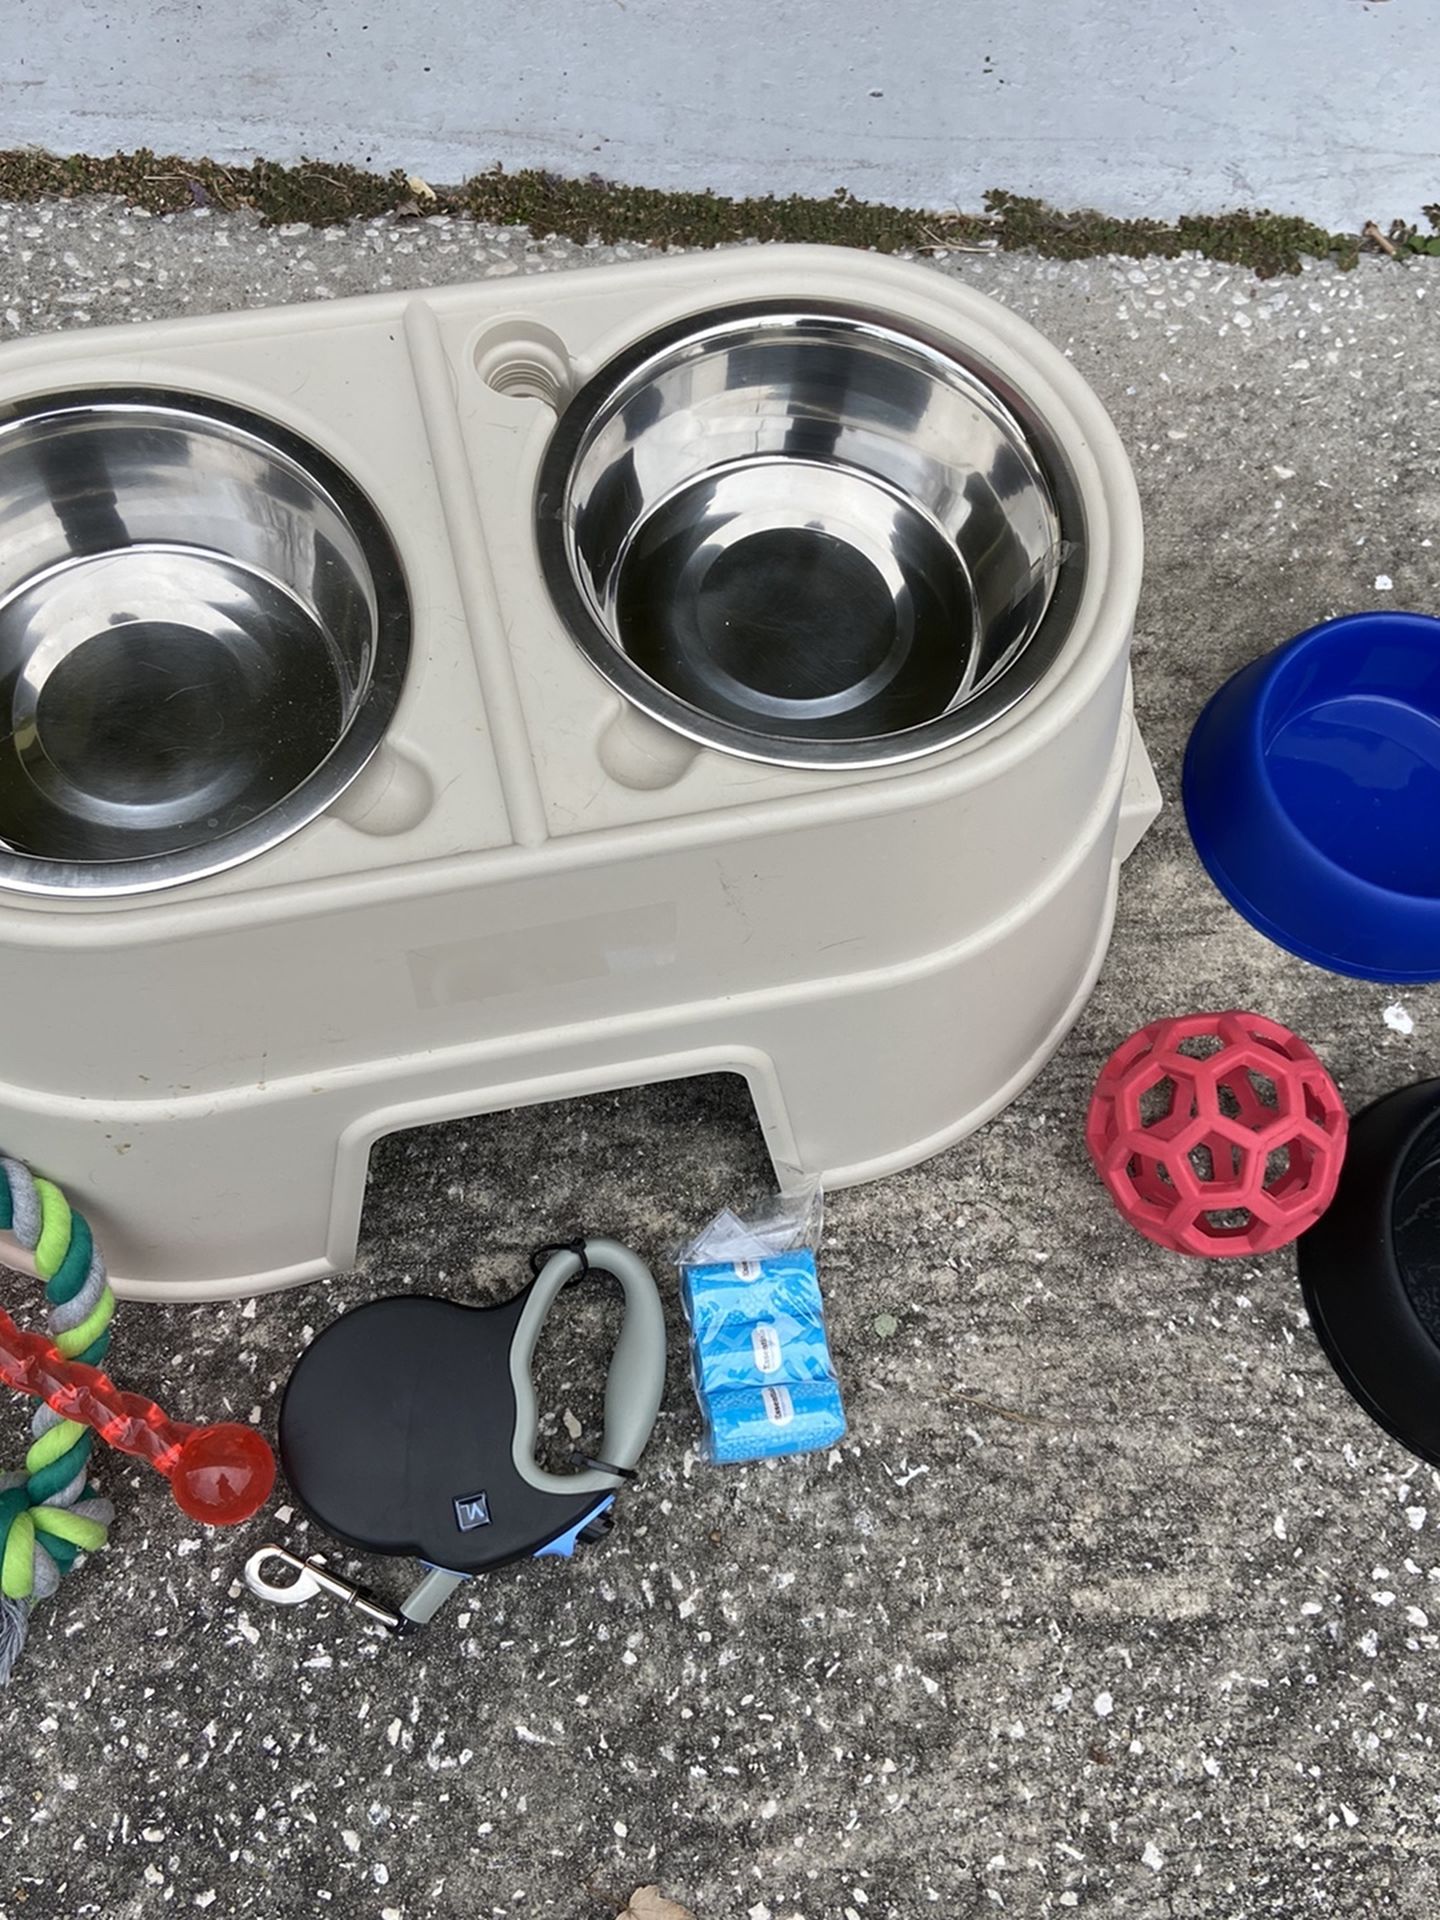 Dog Crate Food Bed Toys